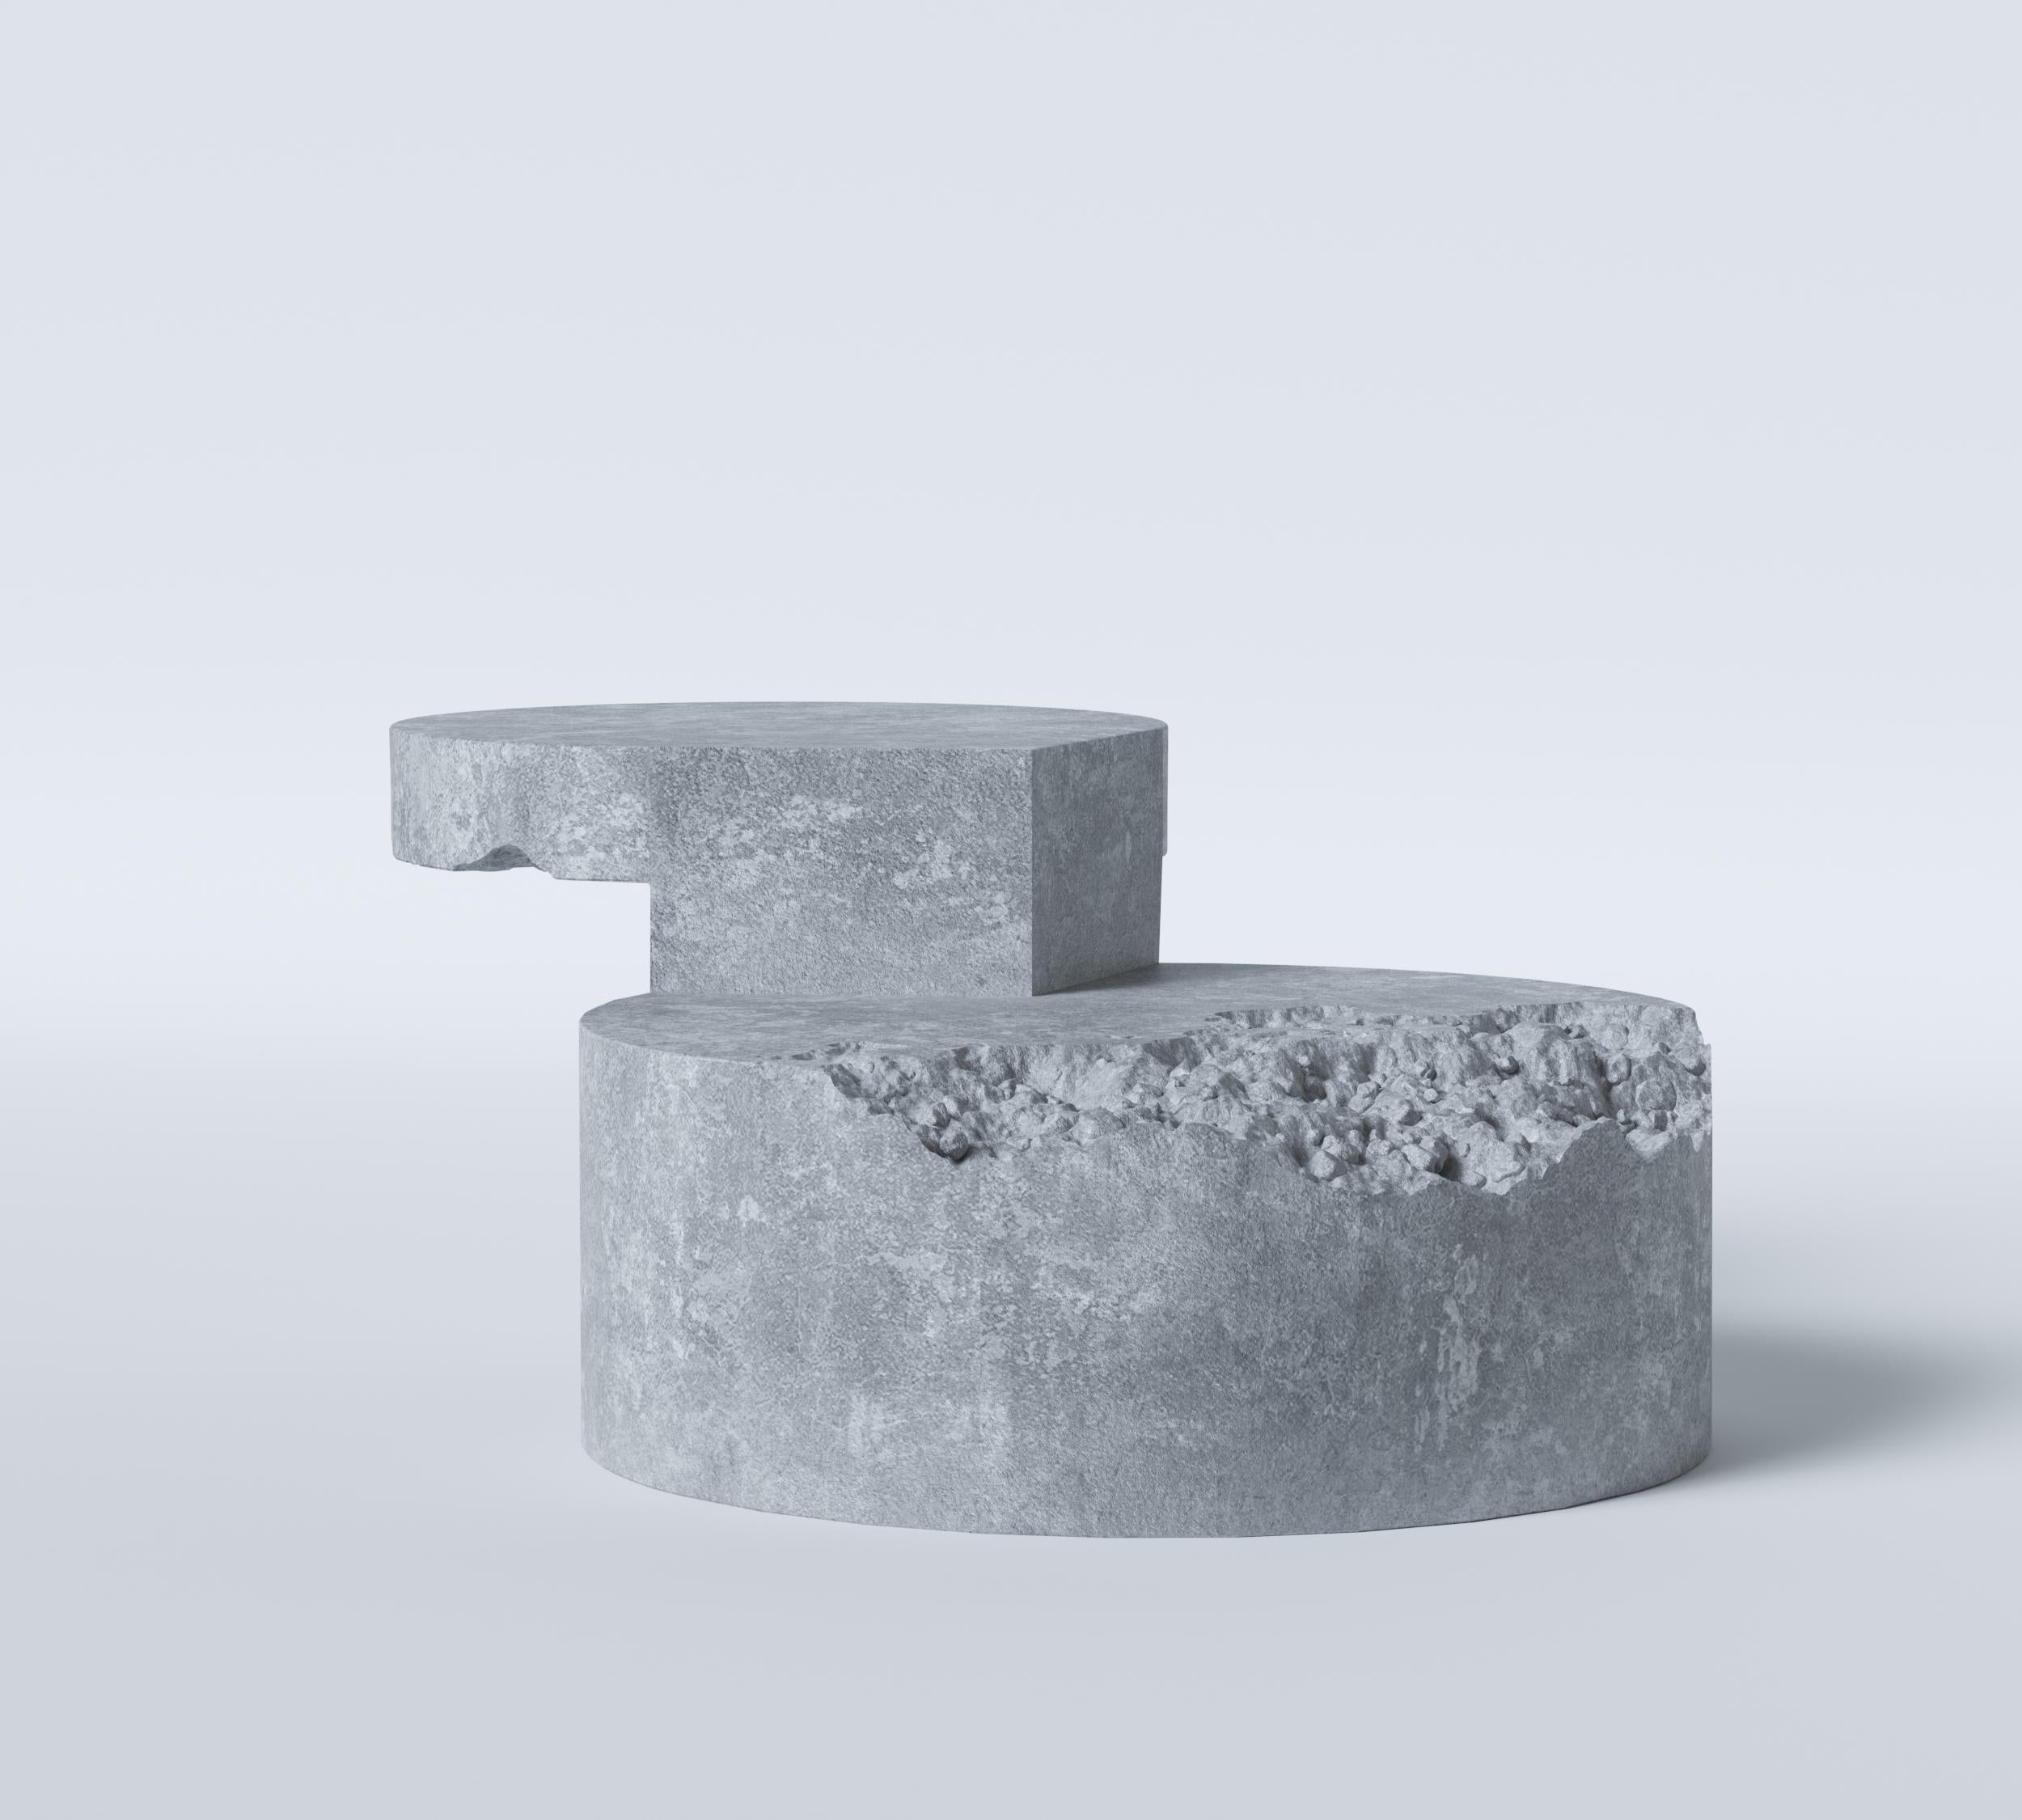 This furniture item holds in itself the history of relations of humans and the force of stone. The author decided to express in the center table the idea of conquering the brute power of stone by man. The rough, ragged edge of the table on one side